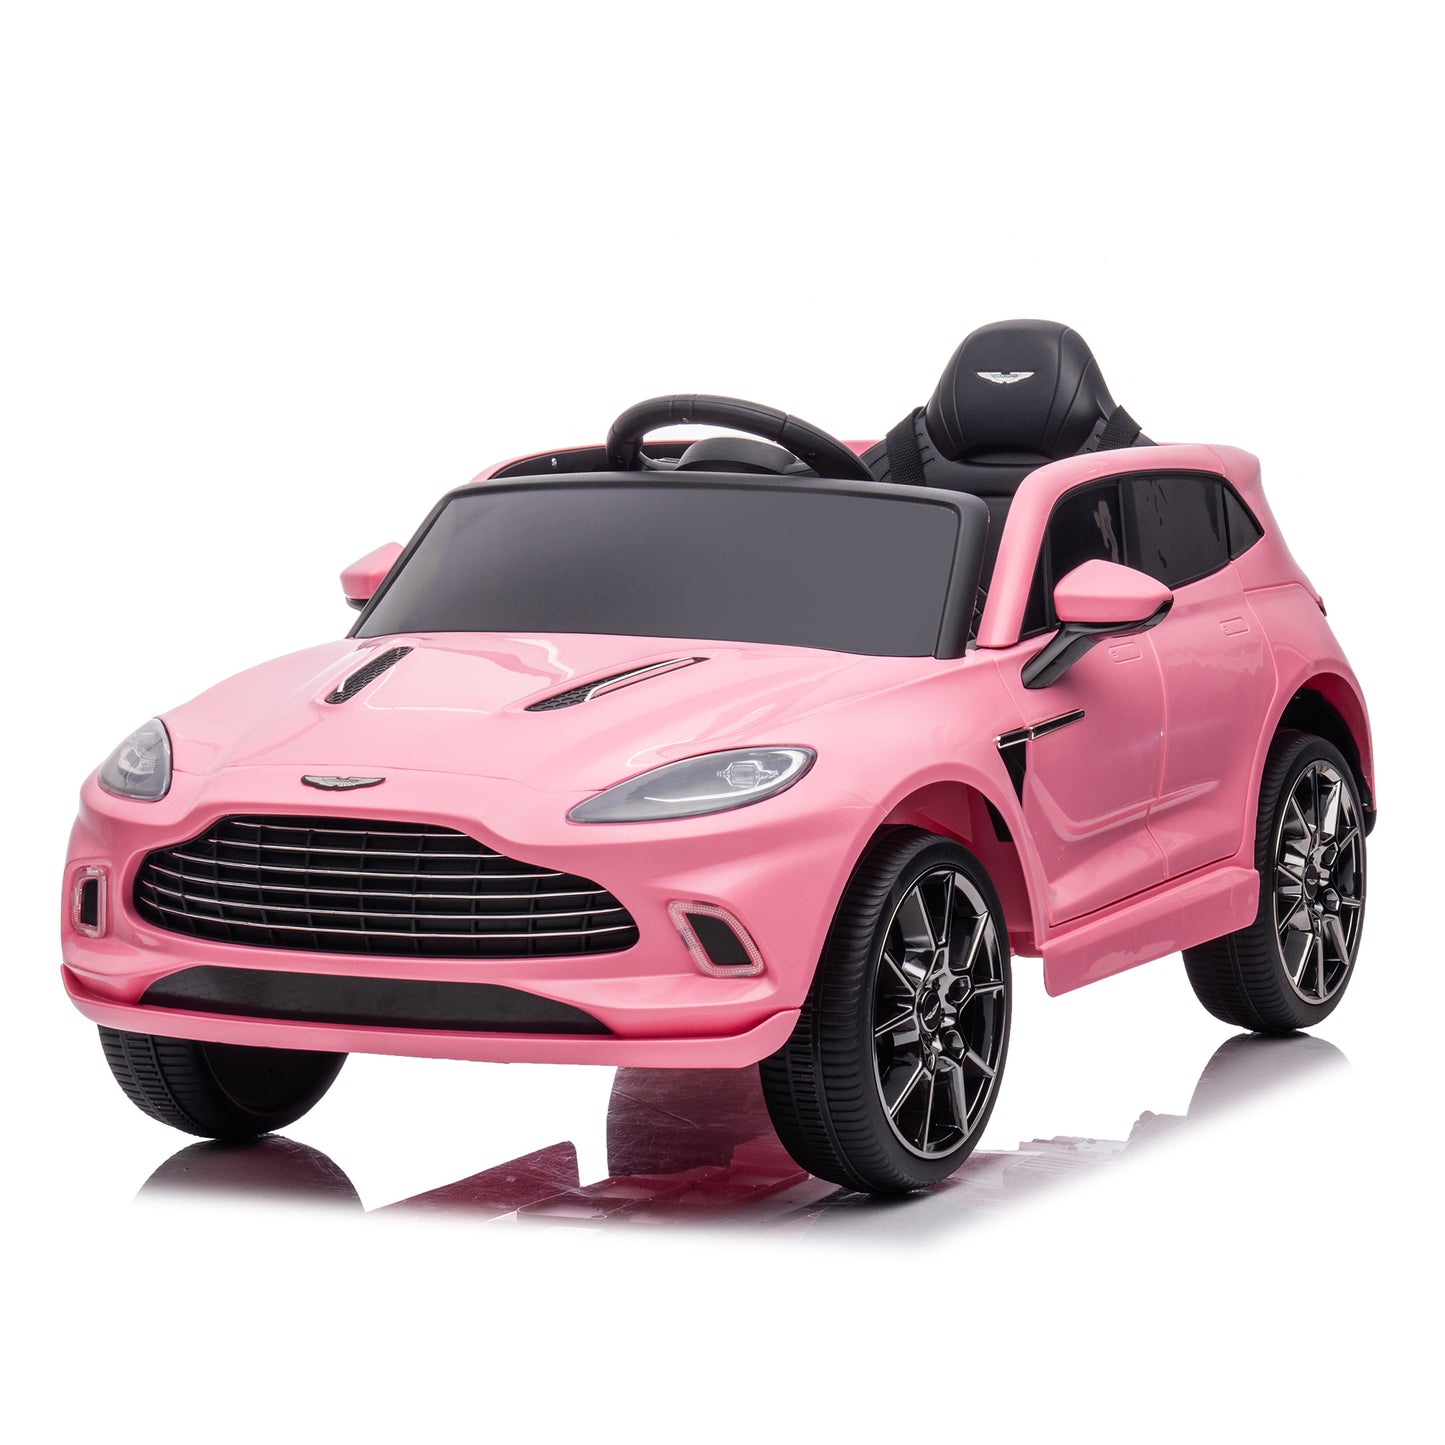 Aston Martin 12V Dual-drive remote control electric Kid Ride On Car, Battery Powered Kids Ride-on Car pink, 4 Wheels Children toys vehicle ,LED Headlights, remote control, music, USB